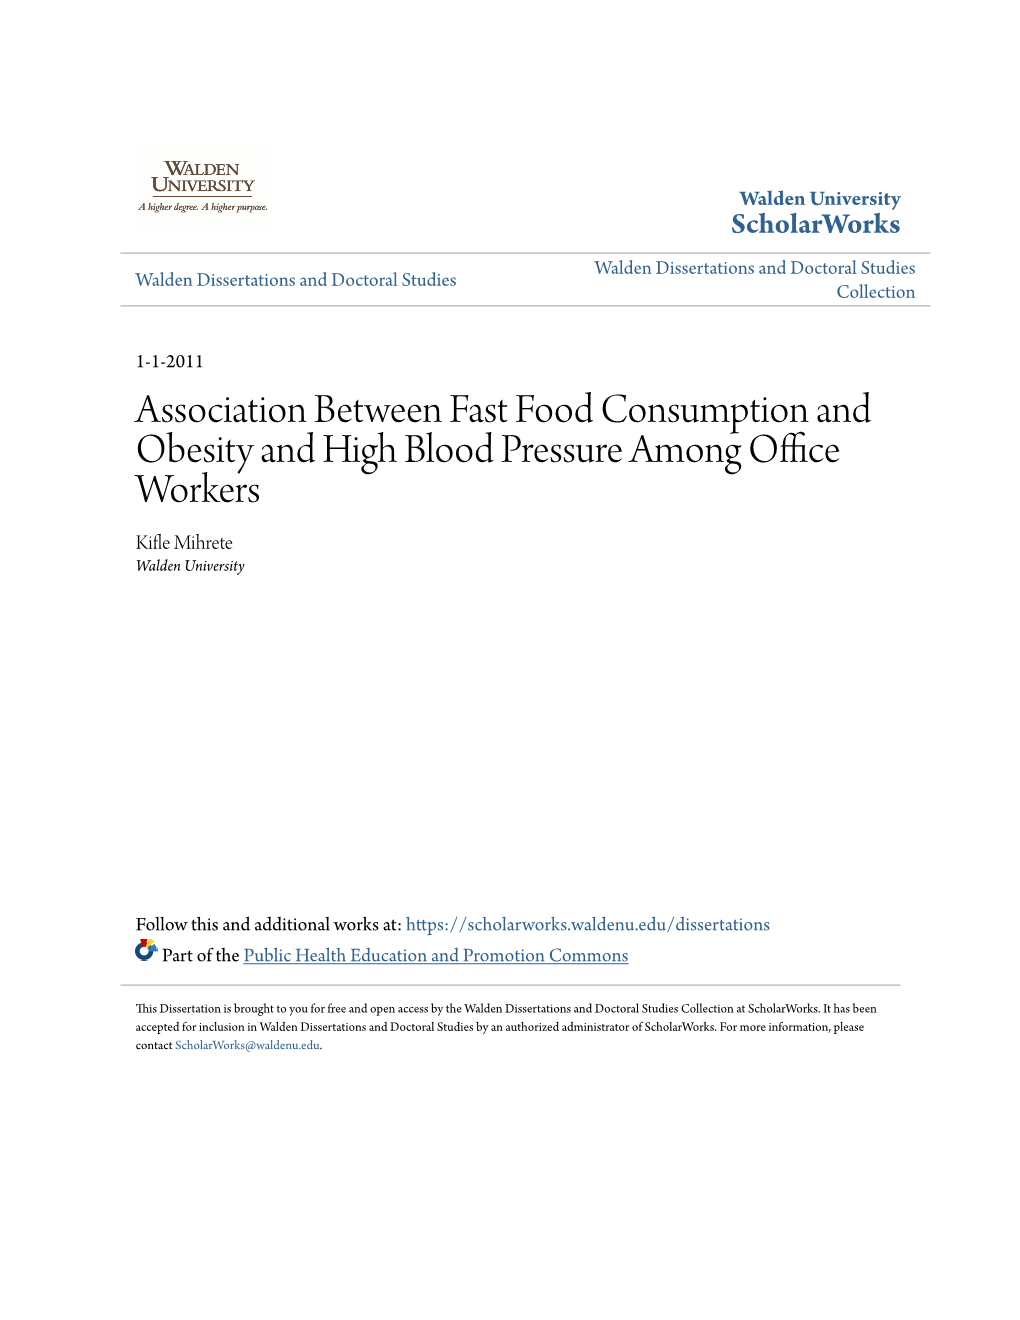 Association Between Fast Food Consumption and Obesity and High Blood Pressure Among Office Workers Kifle Im Hrete Walden University